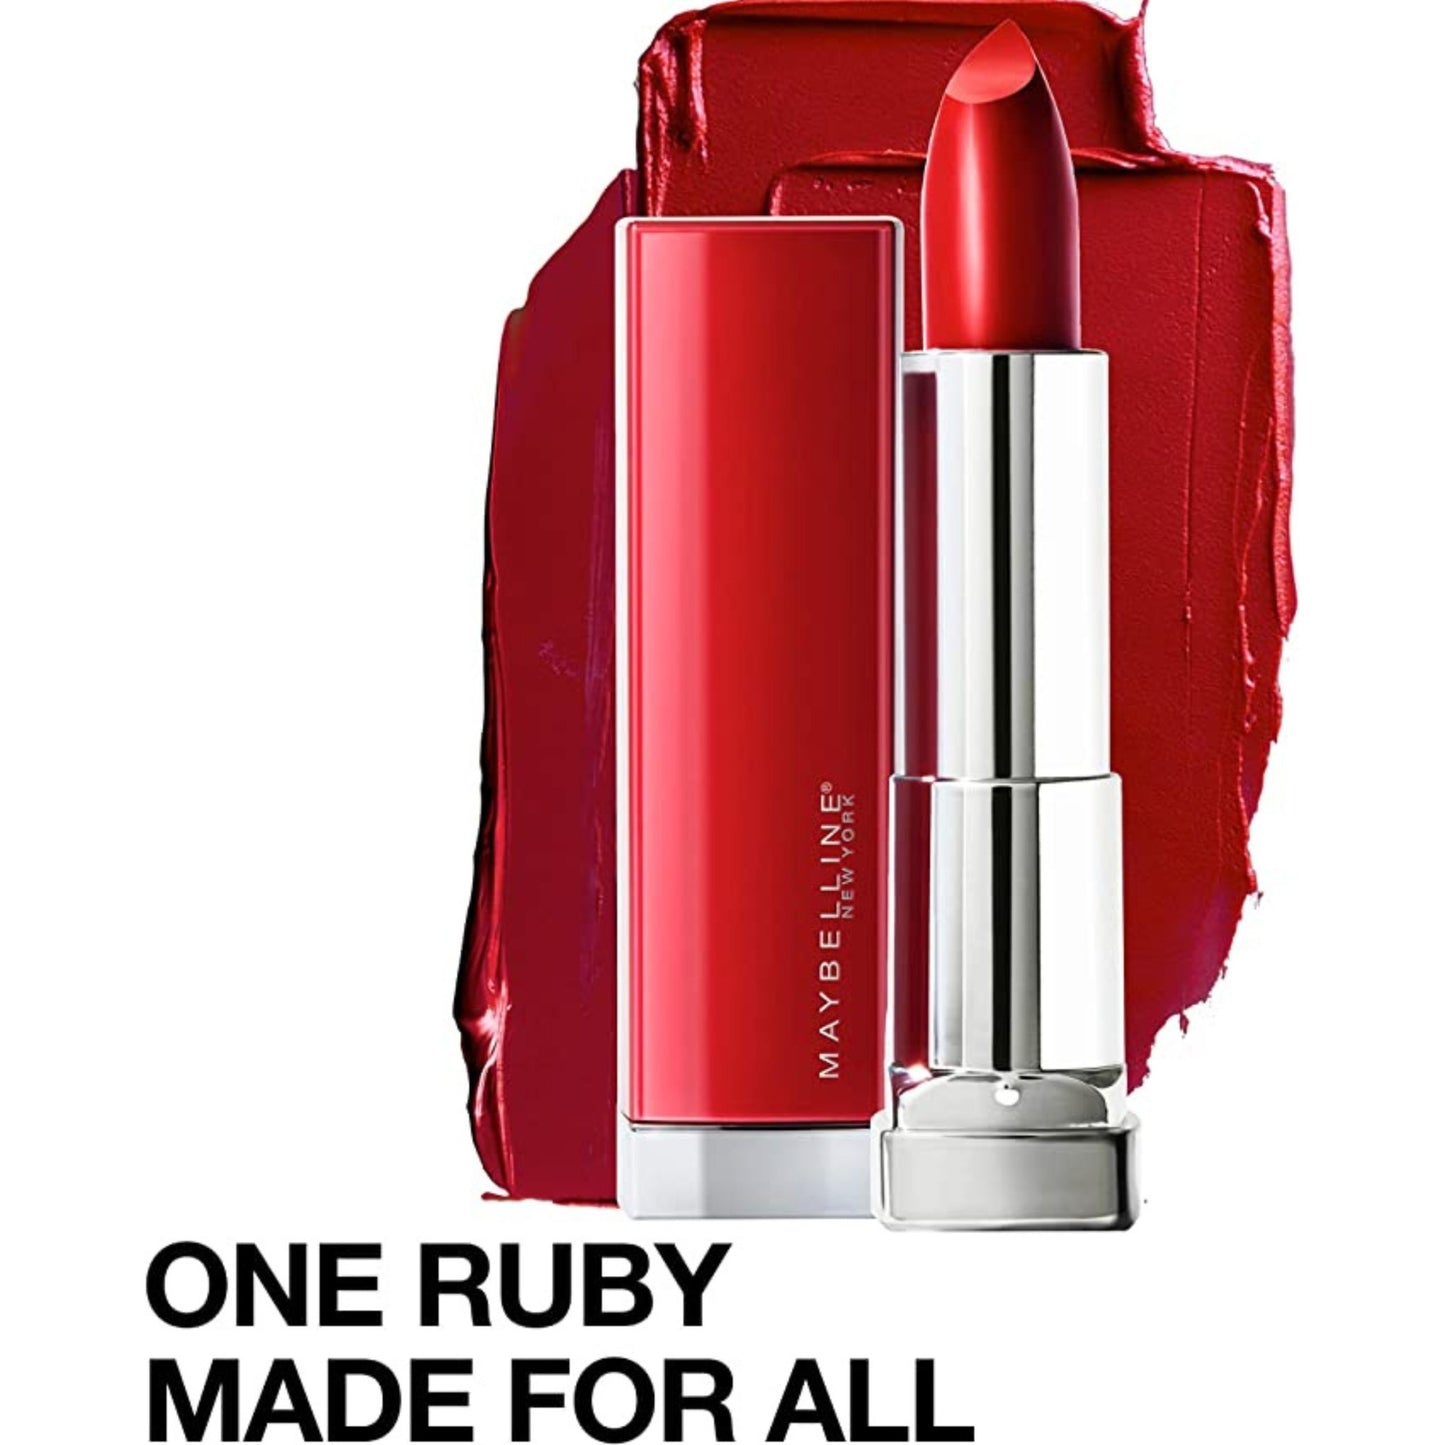 Maybelline New York Color Sensational Made for All Lipstick, Crisp Lip Color & Hydrating Formula, Ruby For Me, Red,